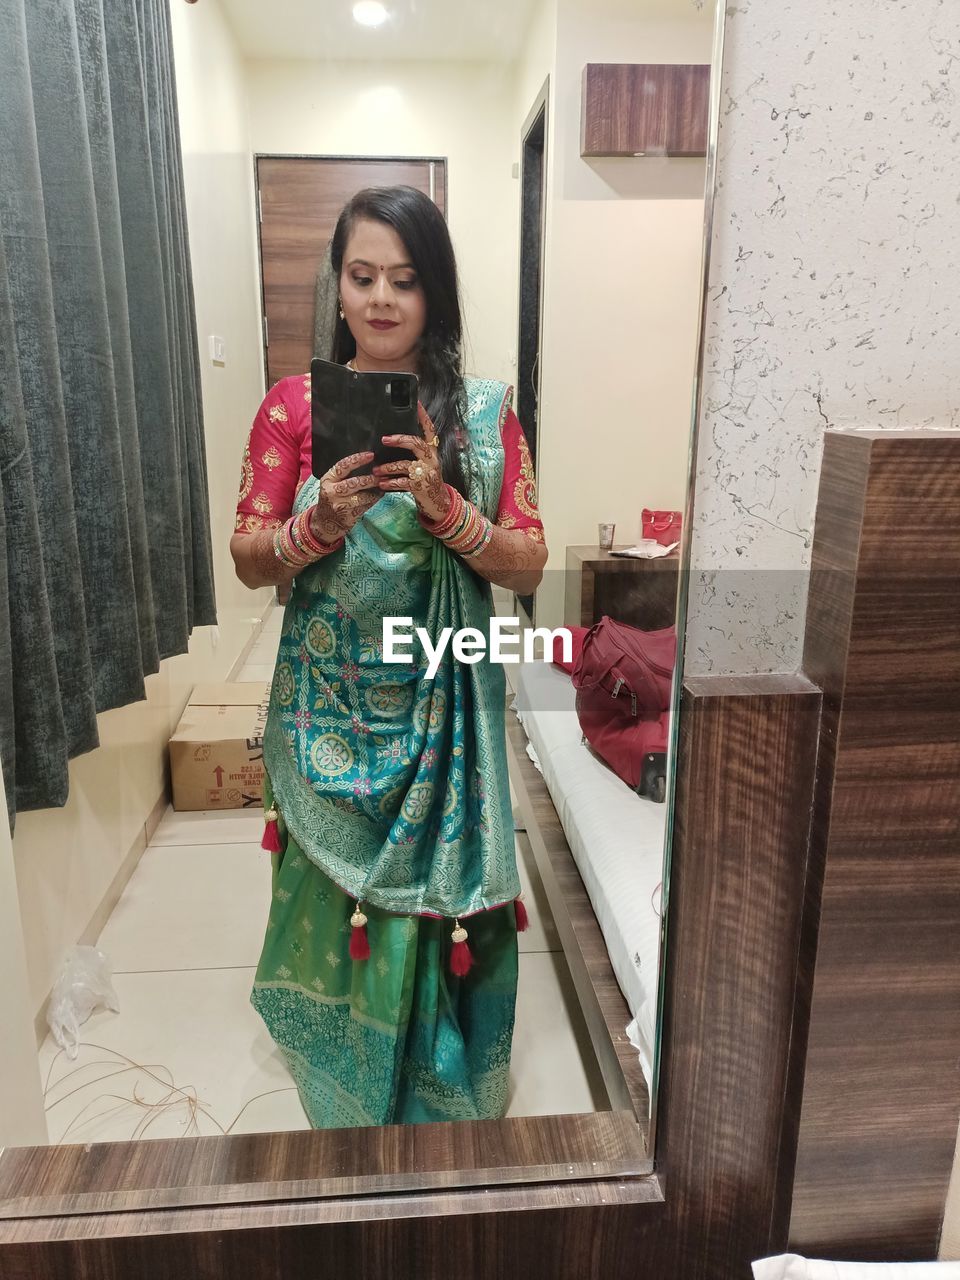 one person, women, adult, dress, indoors, clothing, smiling, front view, holding, standing, full length, happiness, lifestyles, young adult, mirror, portrait, female, technology, fashion, wireless technology, art, looking at camera, looking, communication, emotion, mobile phone, domestic room, person, architecture, traditional clothing, home interior